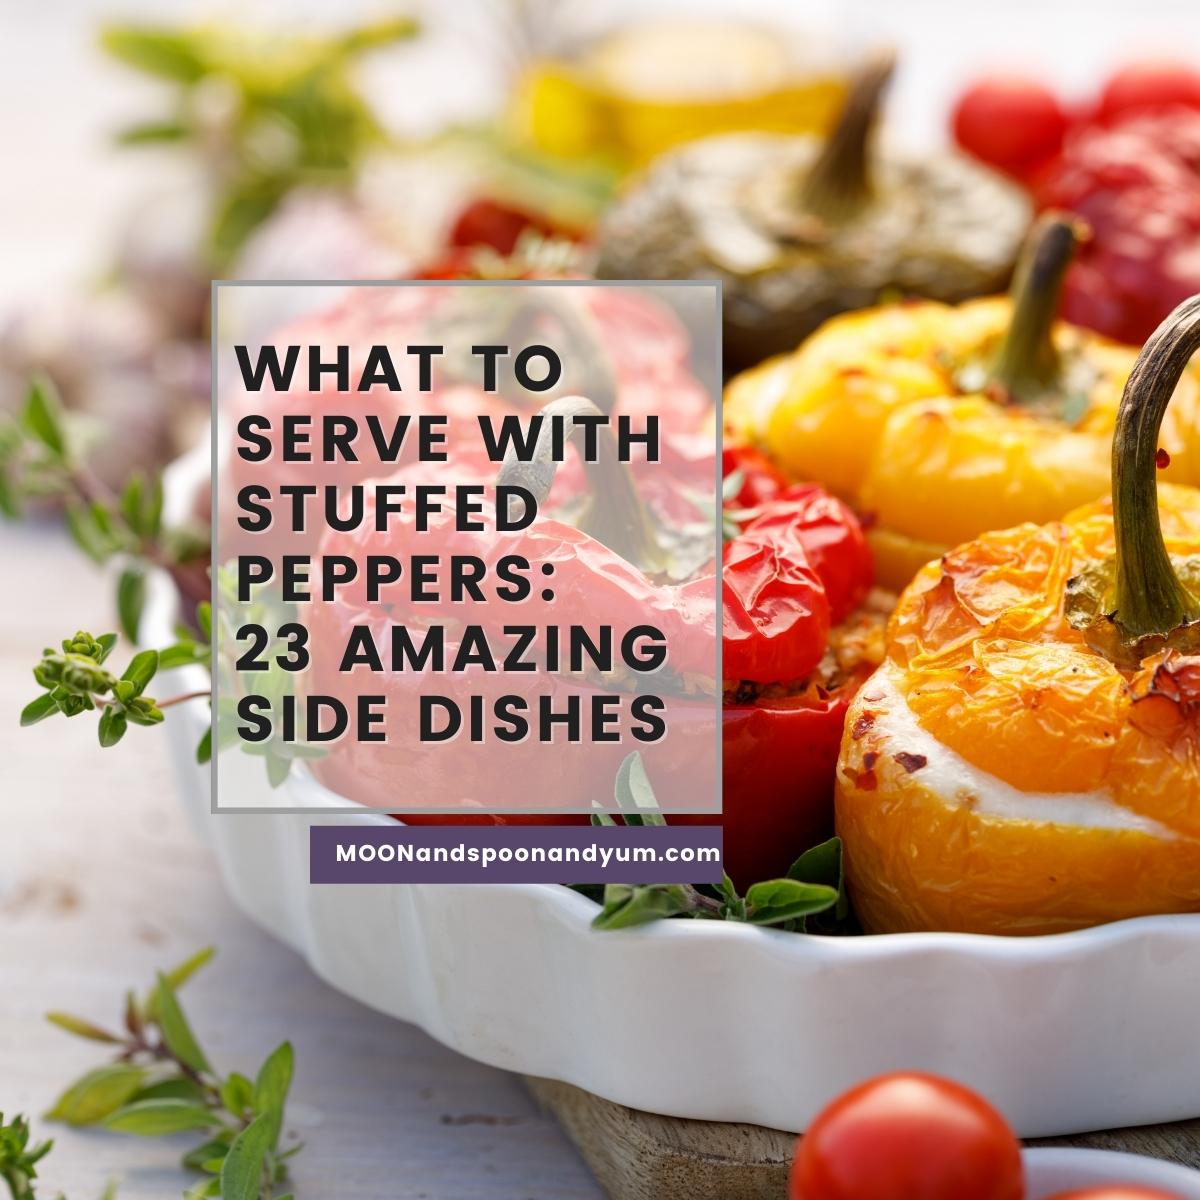 What to Serve with Stuffed Peppers - What Goes? 23 Amazing Side Dishes